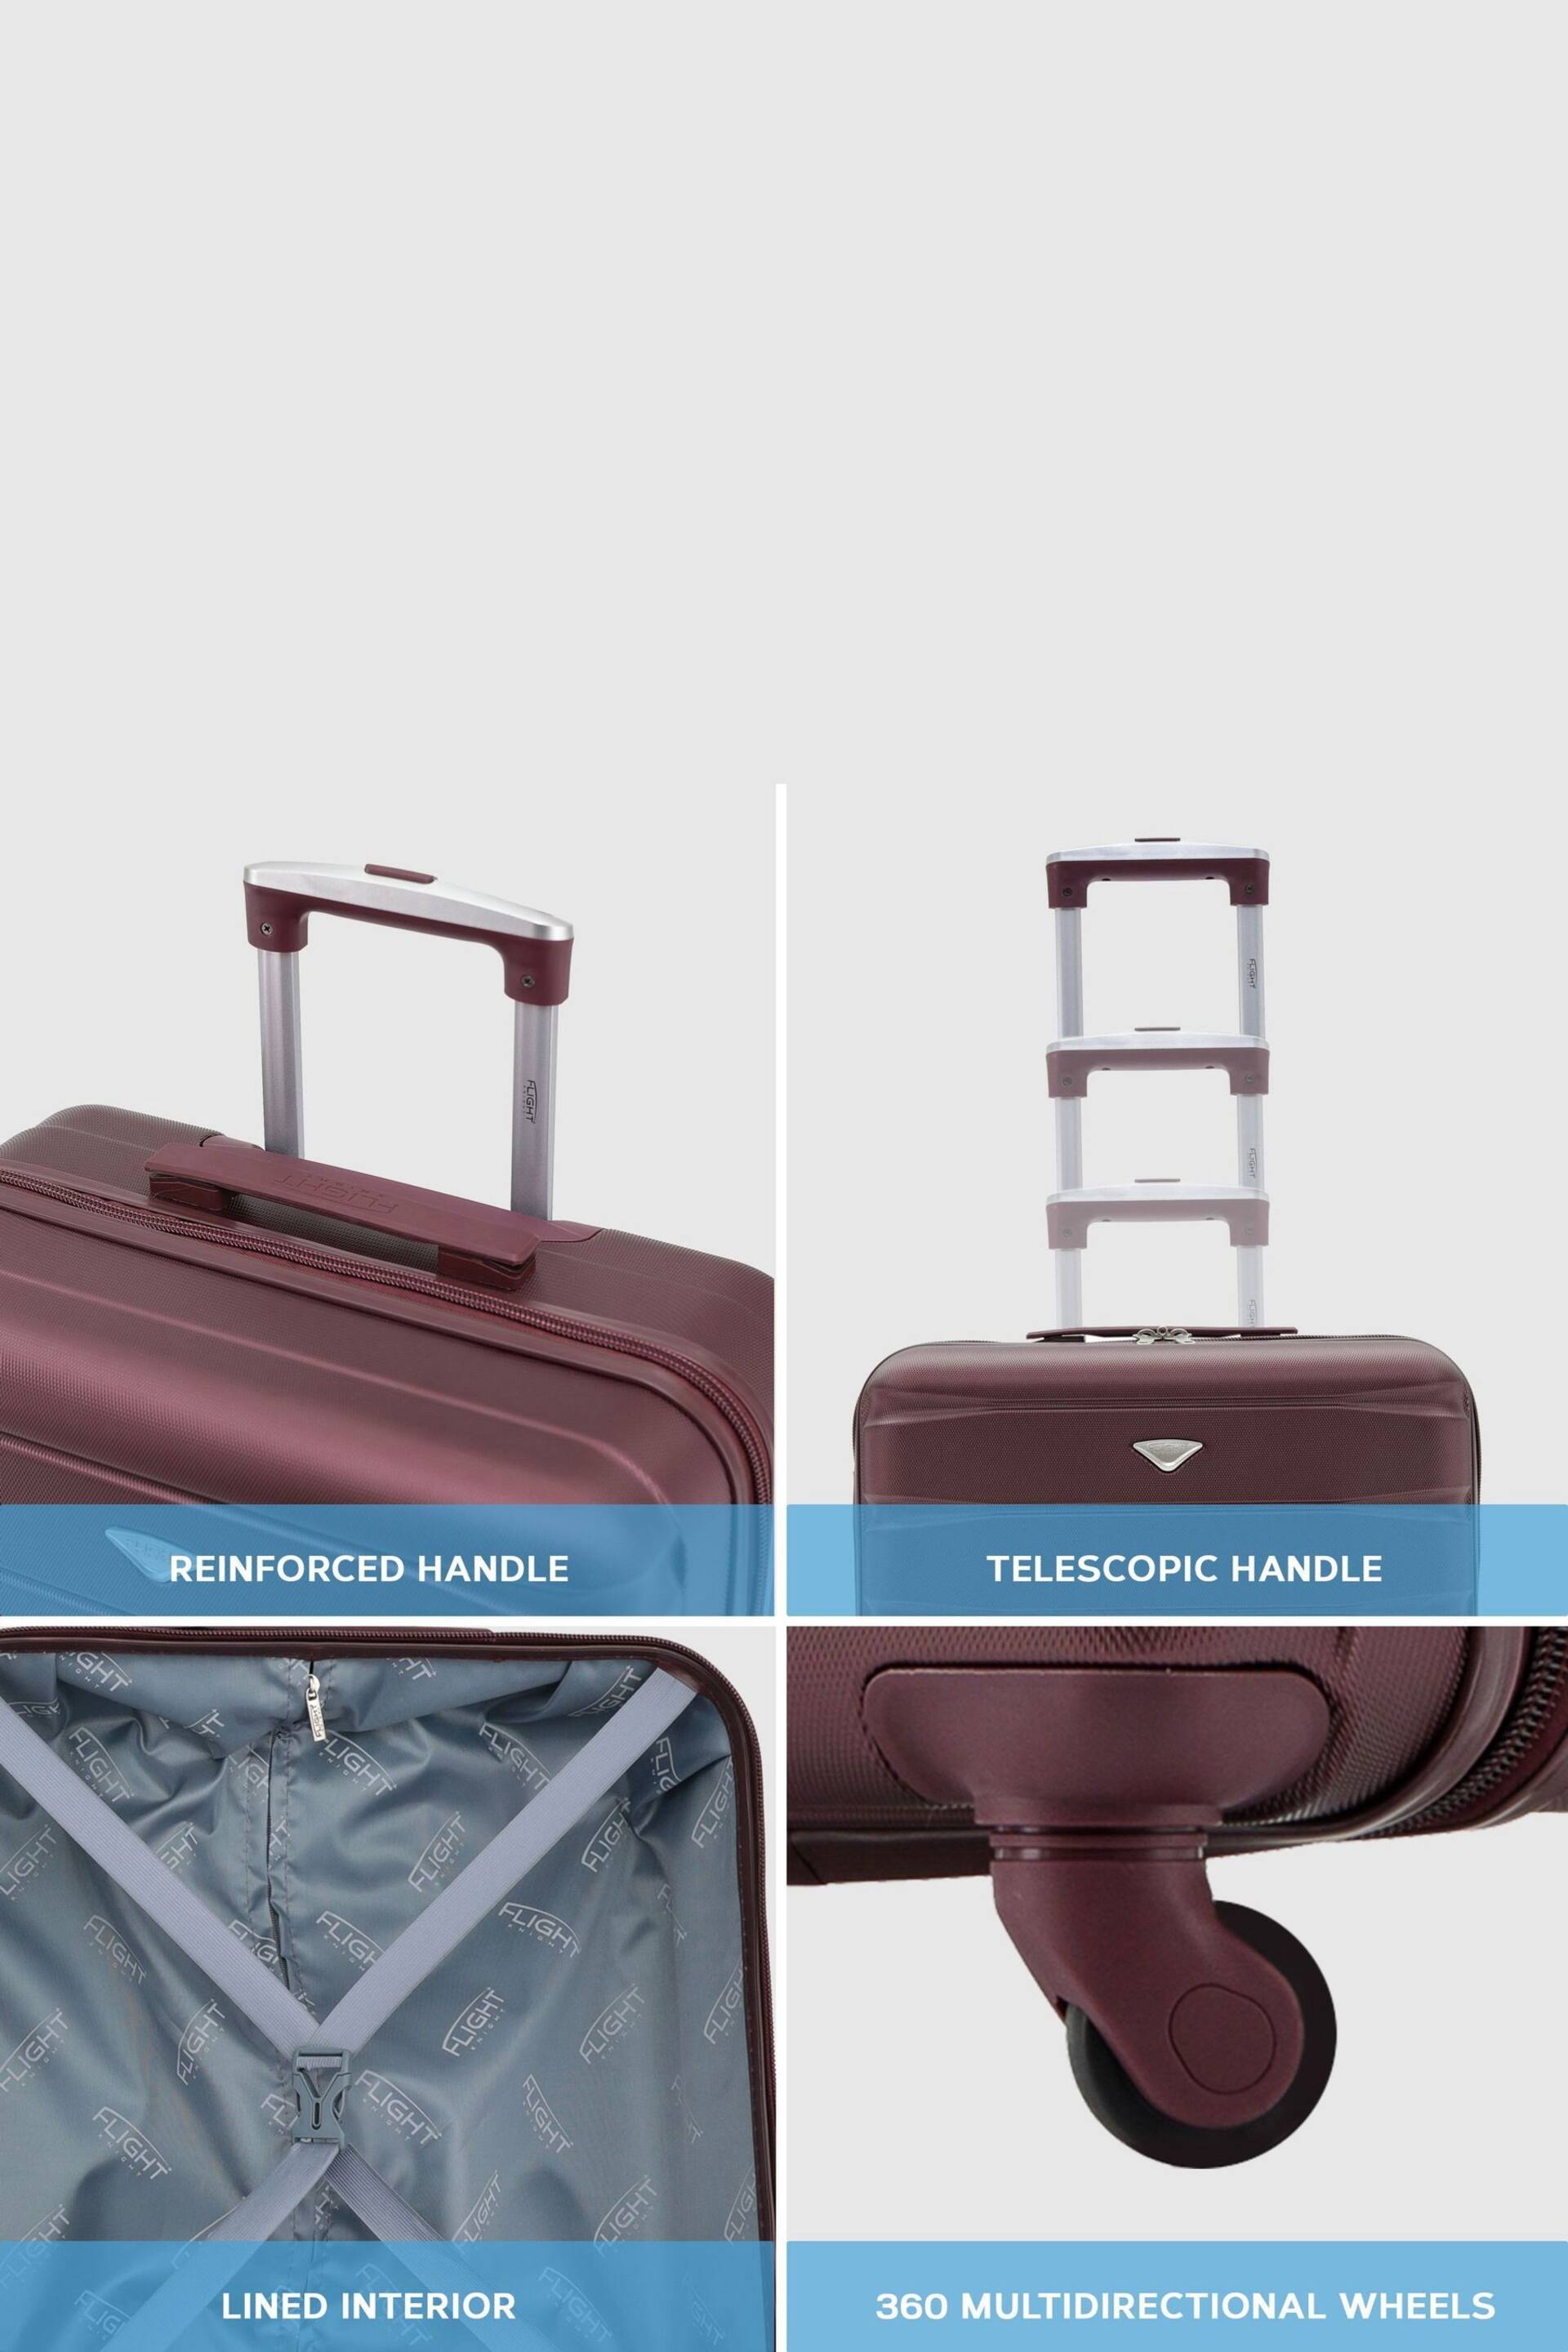 Flight Knight Burgundy + Burgundy EasyJet 56x45x25cm Overhead 4 Wheel ABS Hard Case Cabin Carry On Suitcase Set Of 2 - Image 3 of 8